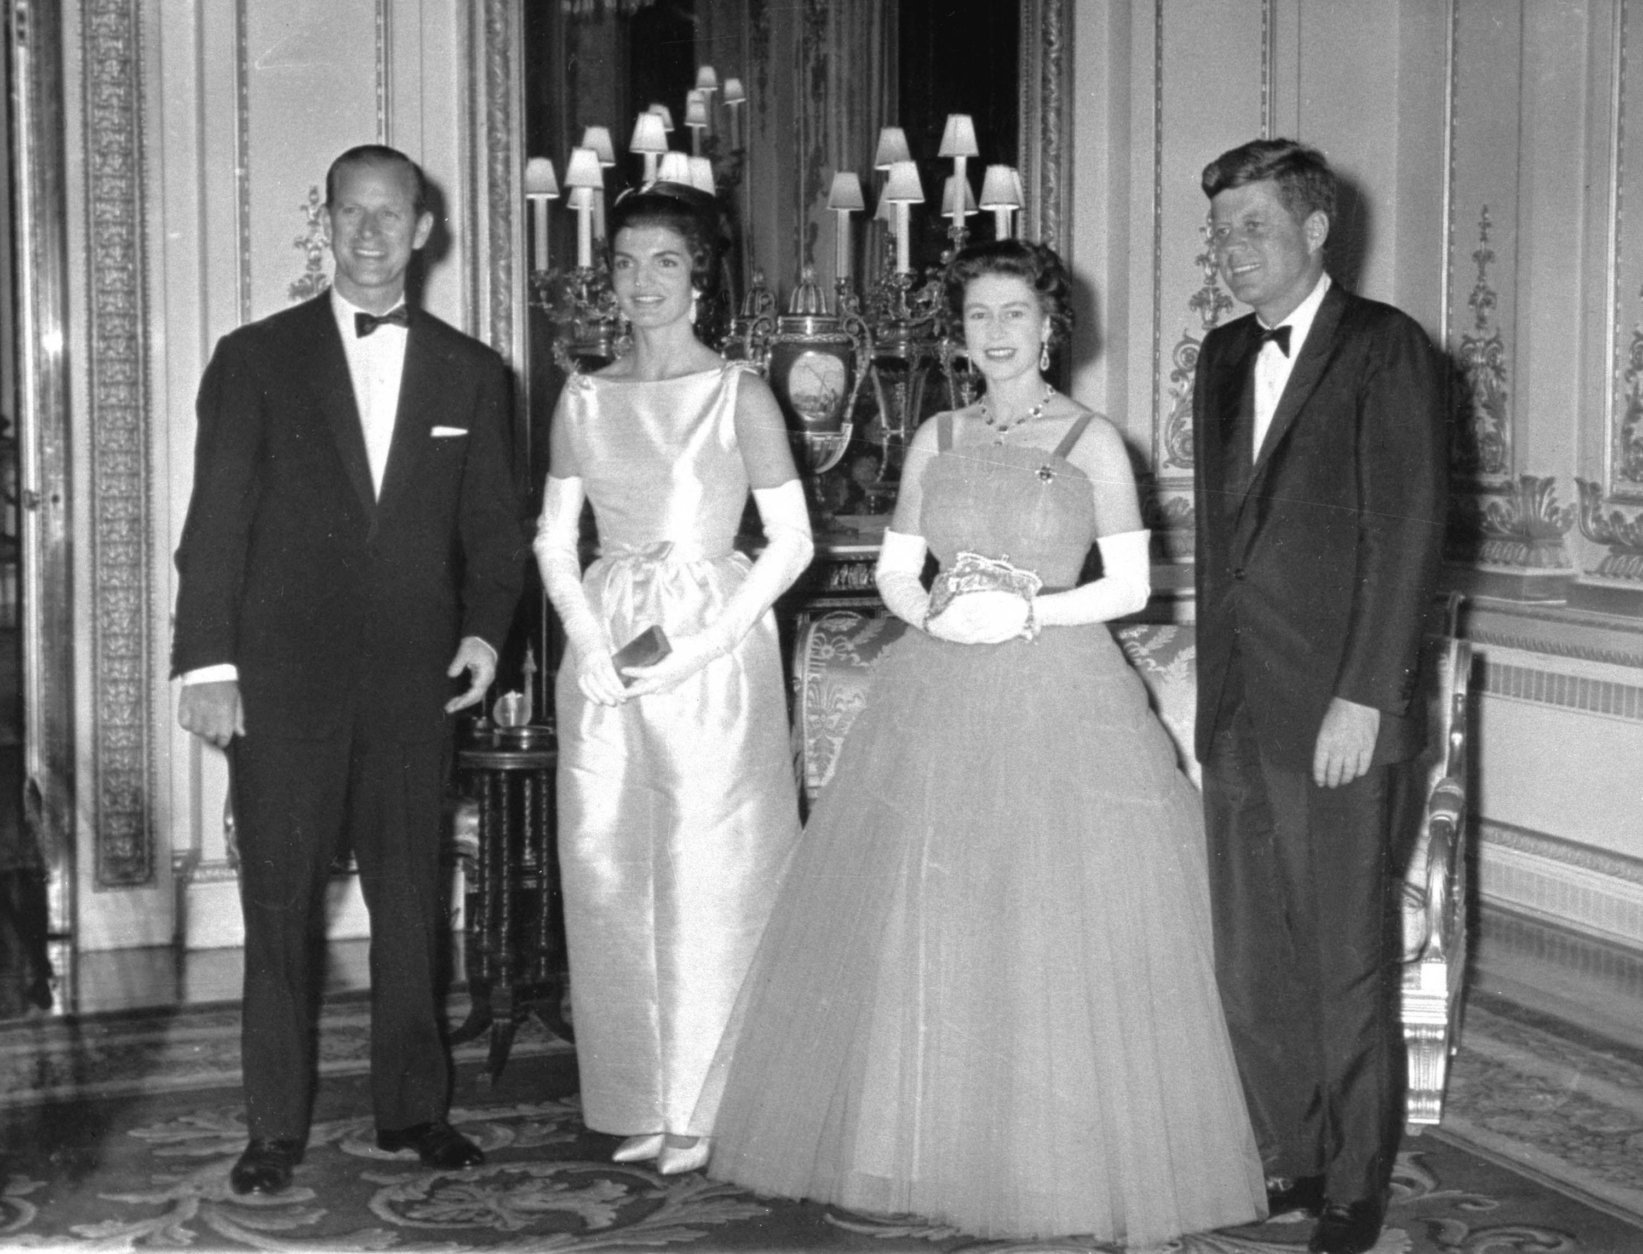 Britain's Queen Elizabeth II poses with U.S. President John F. Kennedy, before a state dinner at Buckingham Palace, June 5, 1961. Also seen are the Duke of Edinburgh, left, and President Kennedy's wife Jackie, second left. (AP Photo/Pool)